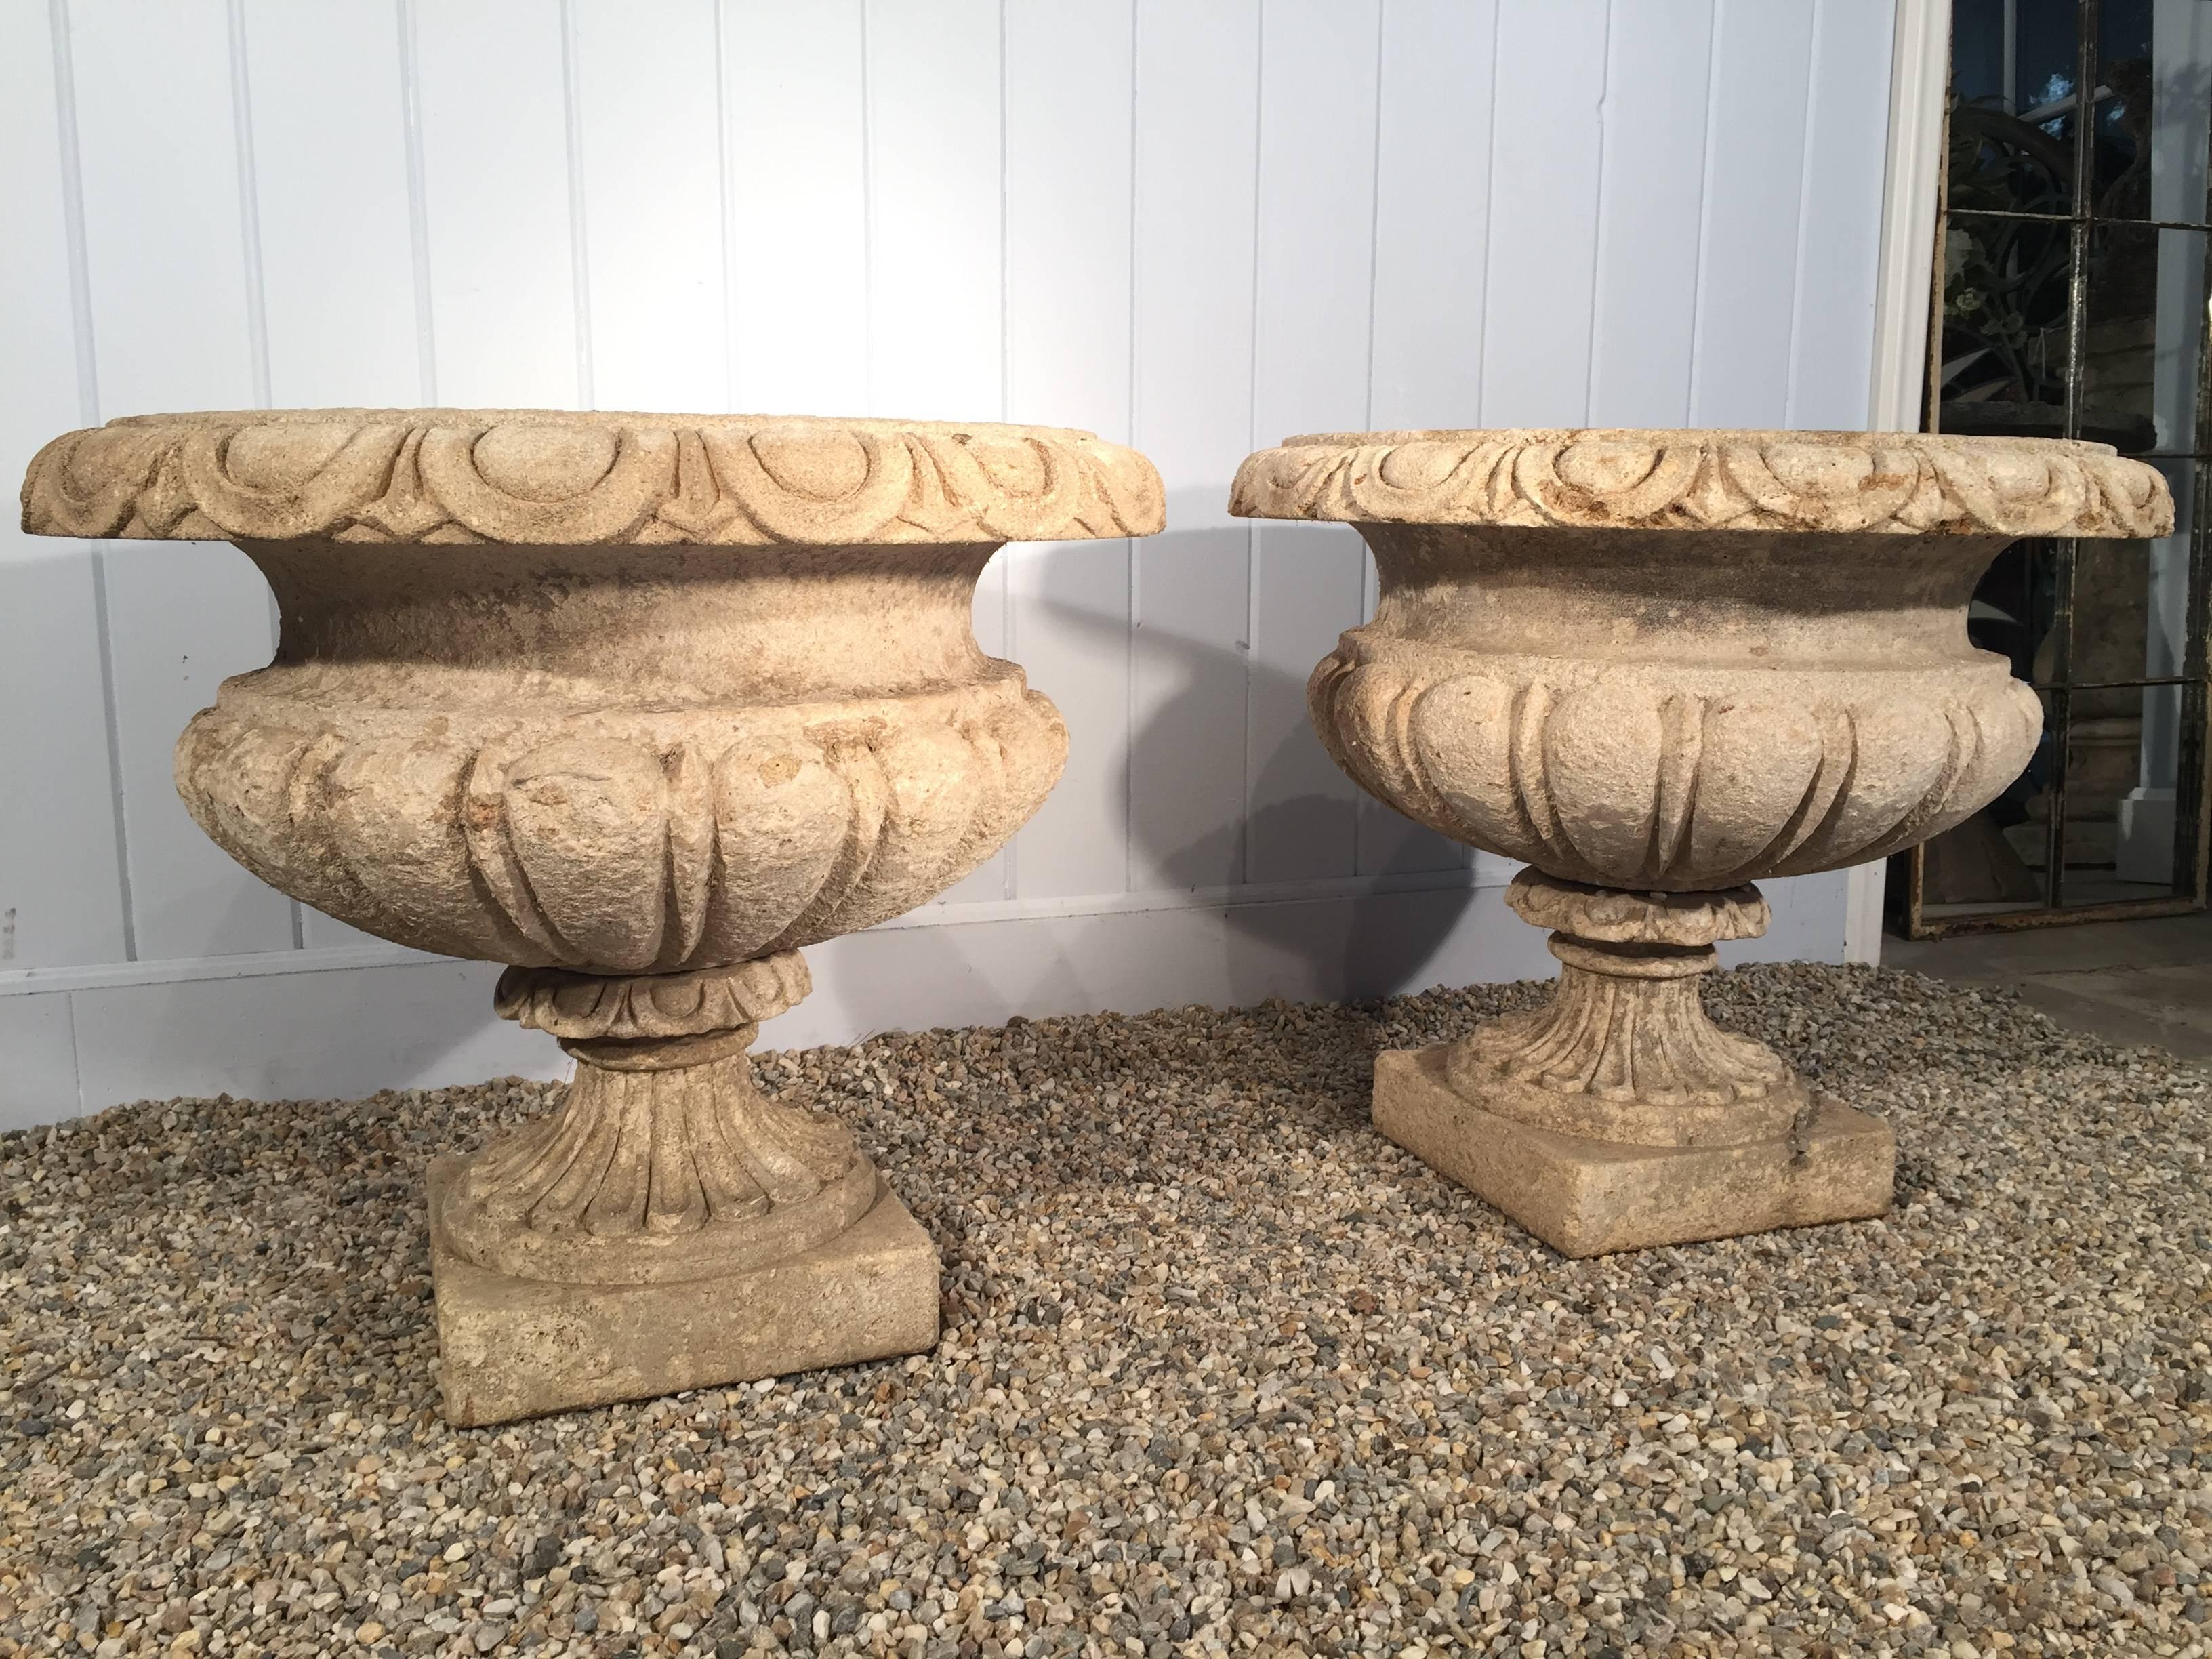 These very beautiful and large hand-carved limestone urns are real showstoppers! They came from the former estate of Michael and Diandra Douglas in Beverly Hills and we believe them to be late 19th century and of Italian origin. One pair is in